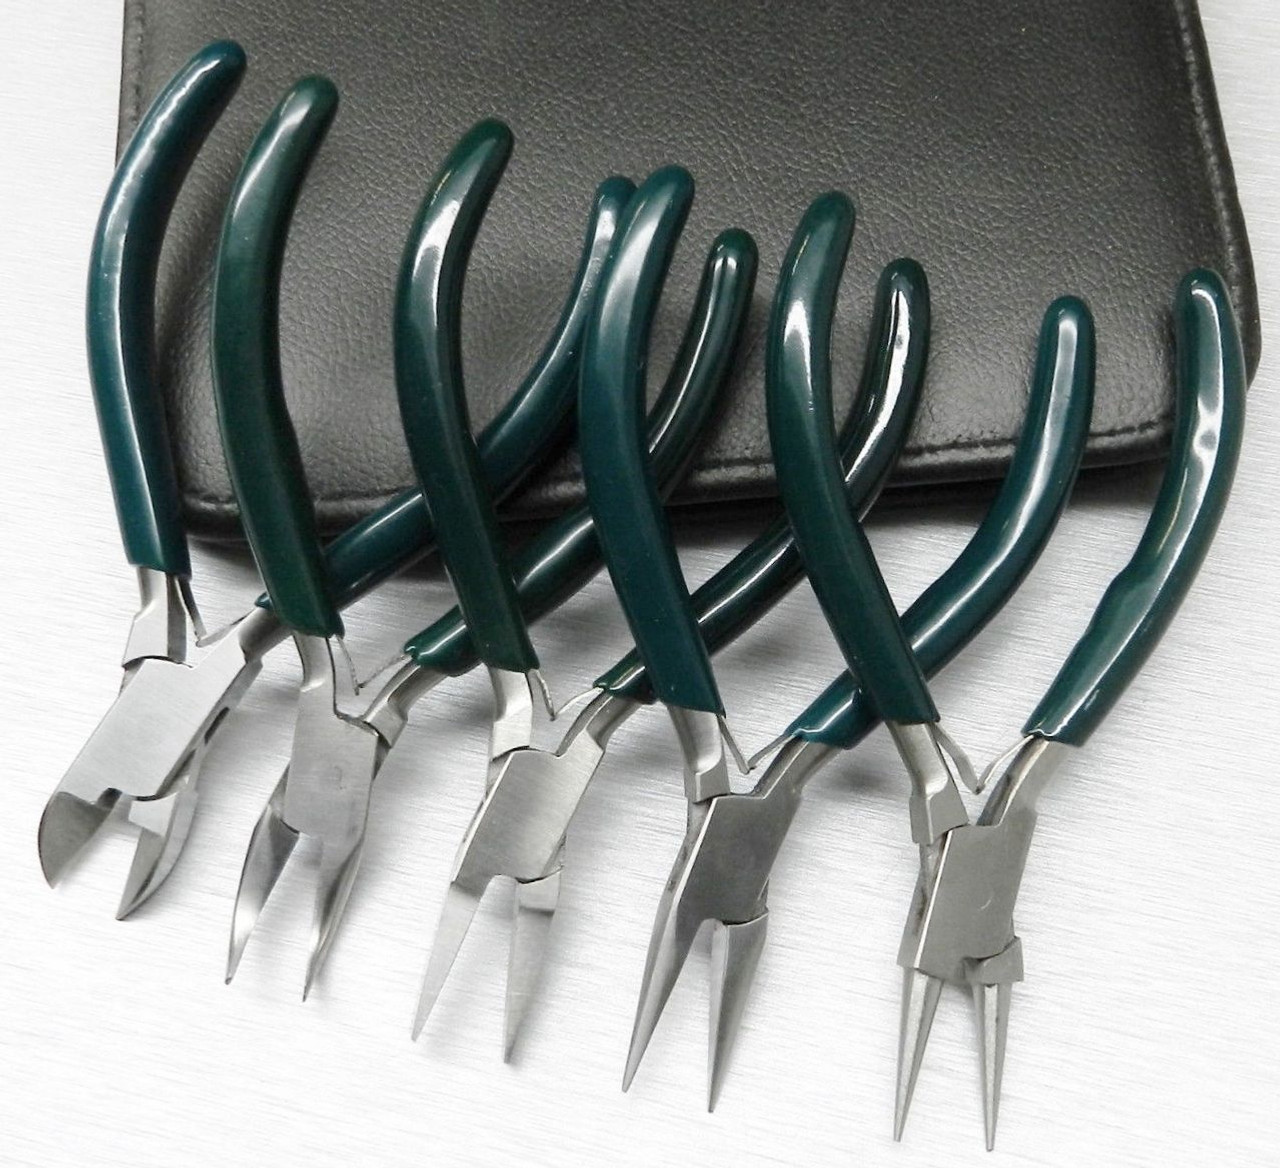 5 Pc Jewelers Pliers Set Jewelry Making Beading Wire Wrapping Hobby 5" Plier Kit